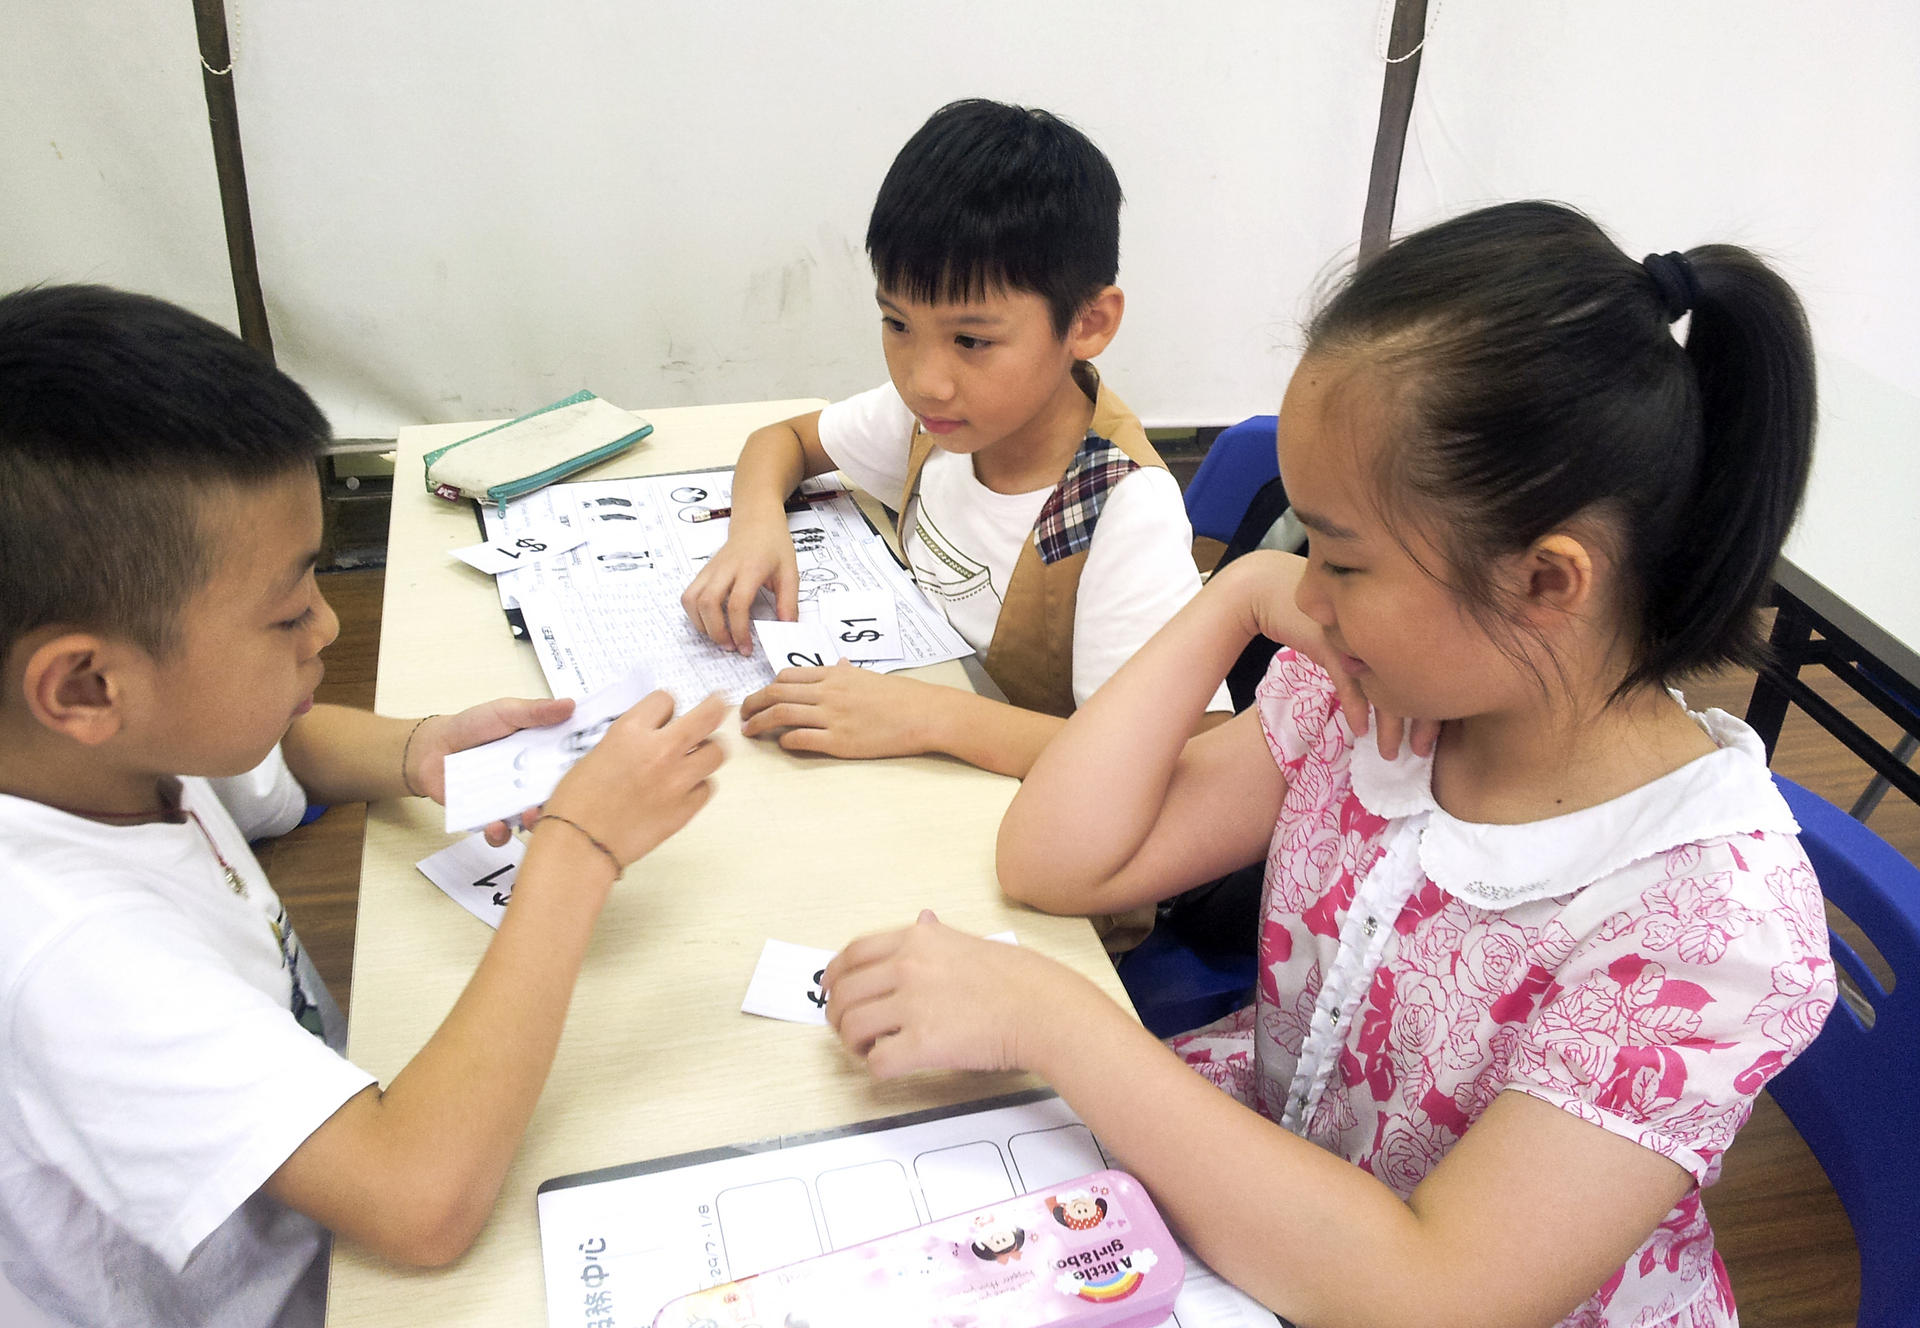 Cross-border students in a class in Shenzhen learn the exchange rate between the yuan and Hong Kong dollars.